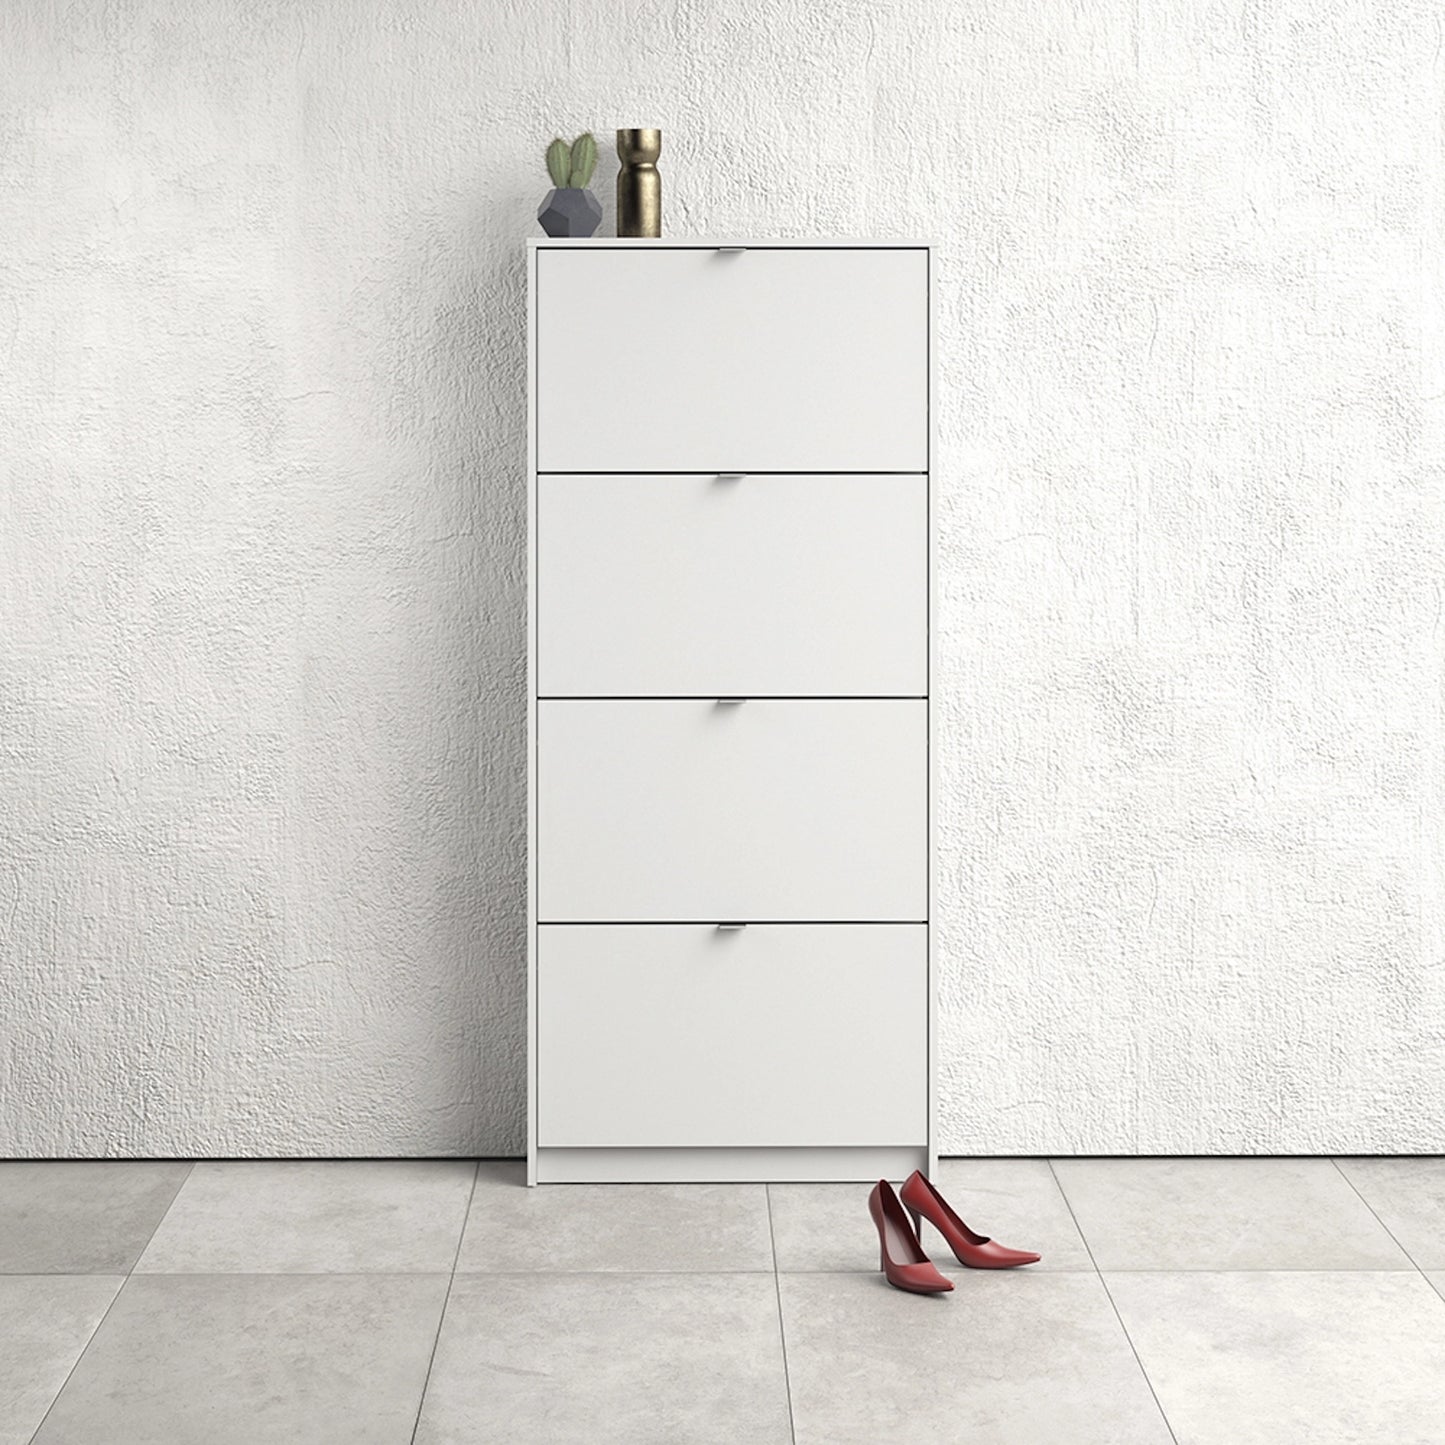 Furniture To Go Shoes Shoe Cabinet W. 4 Tilting Doors & 1 Layer in White